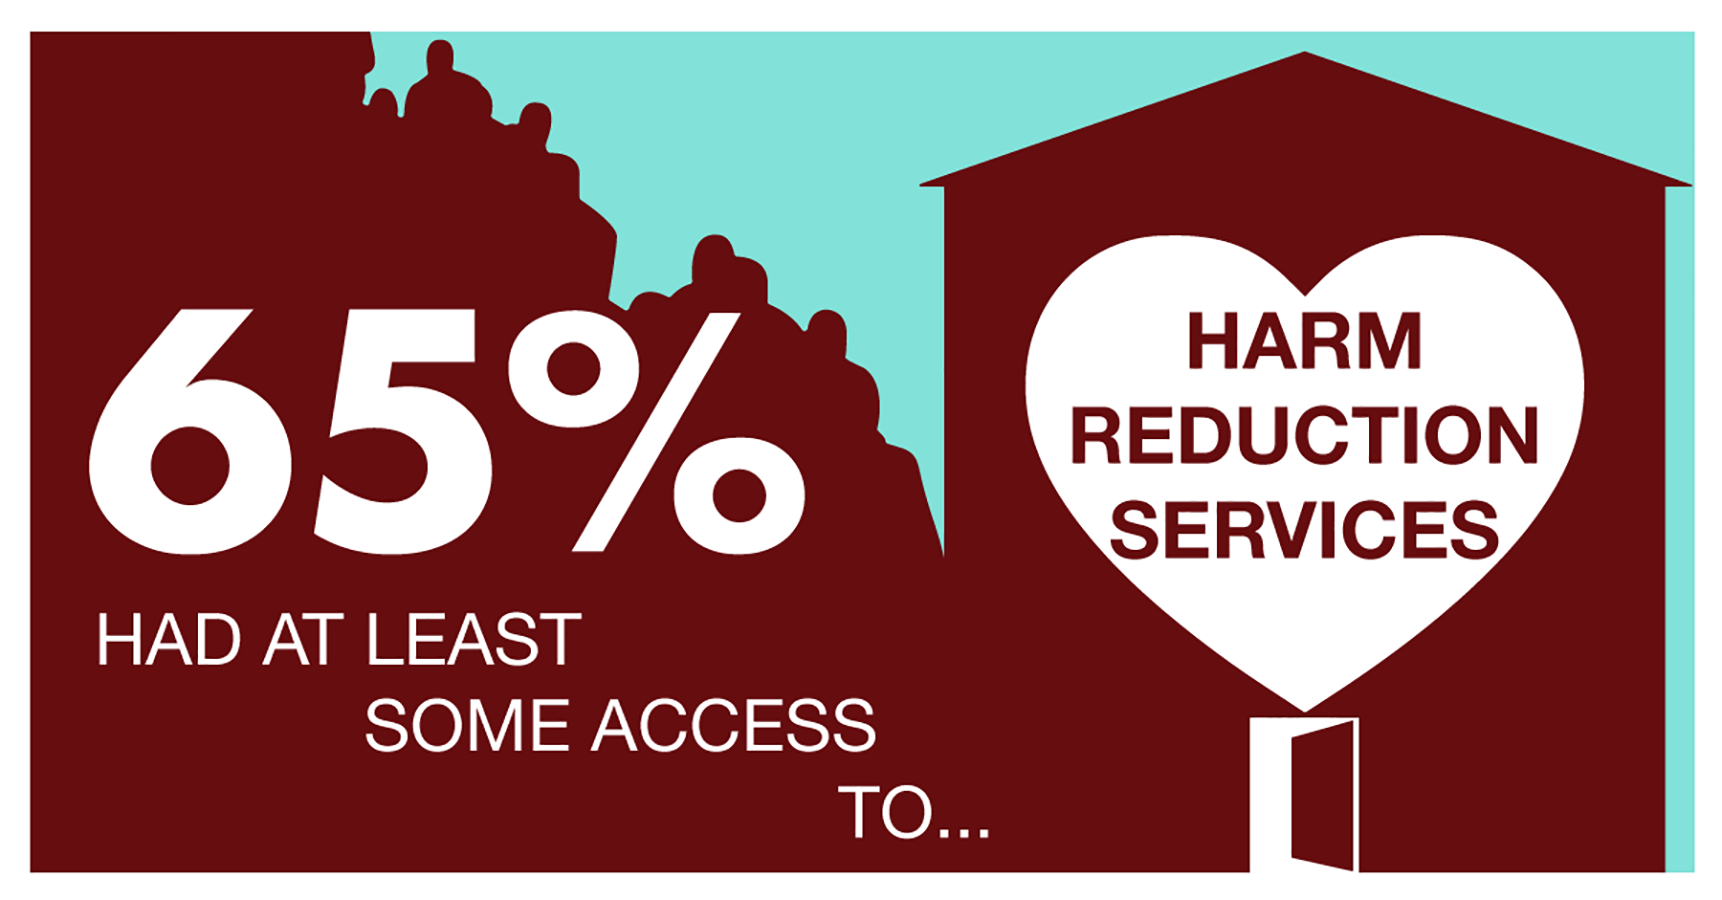 Illustration of an open building bannered with a large heart. Beside it, there's a gathering crowd. Large block type reads '65% had at least some access to harm reduction services'.